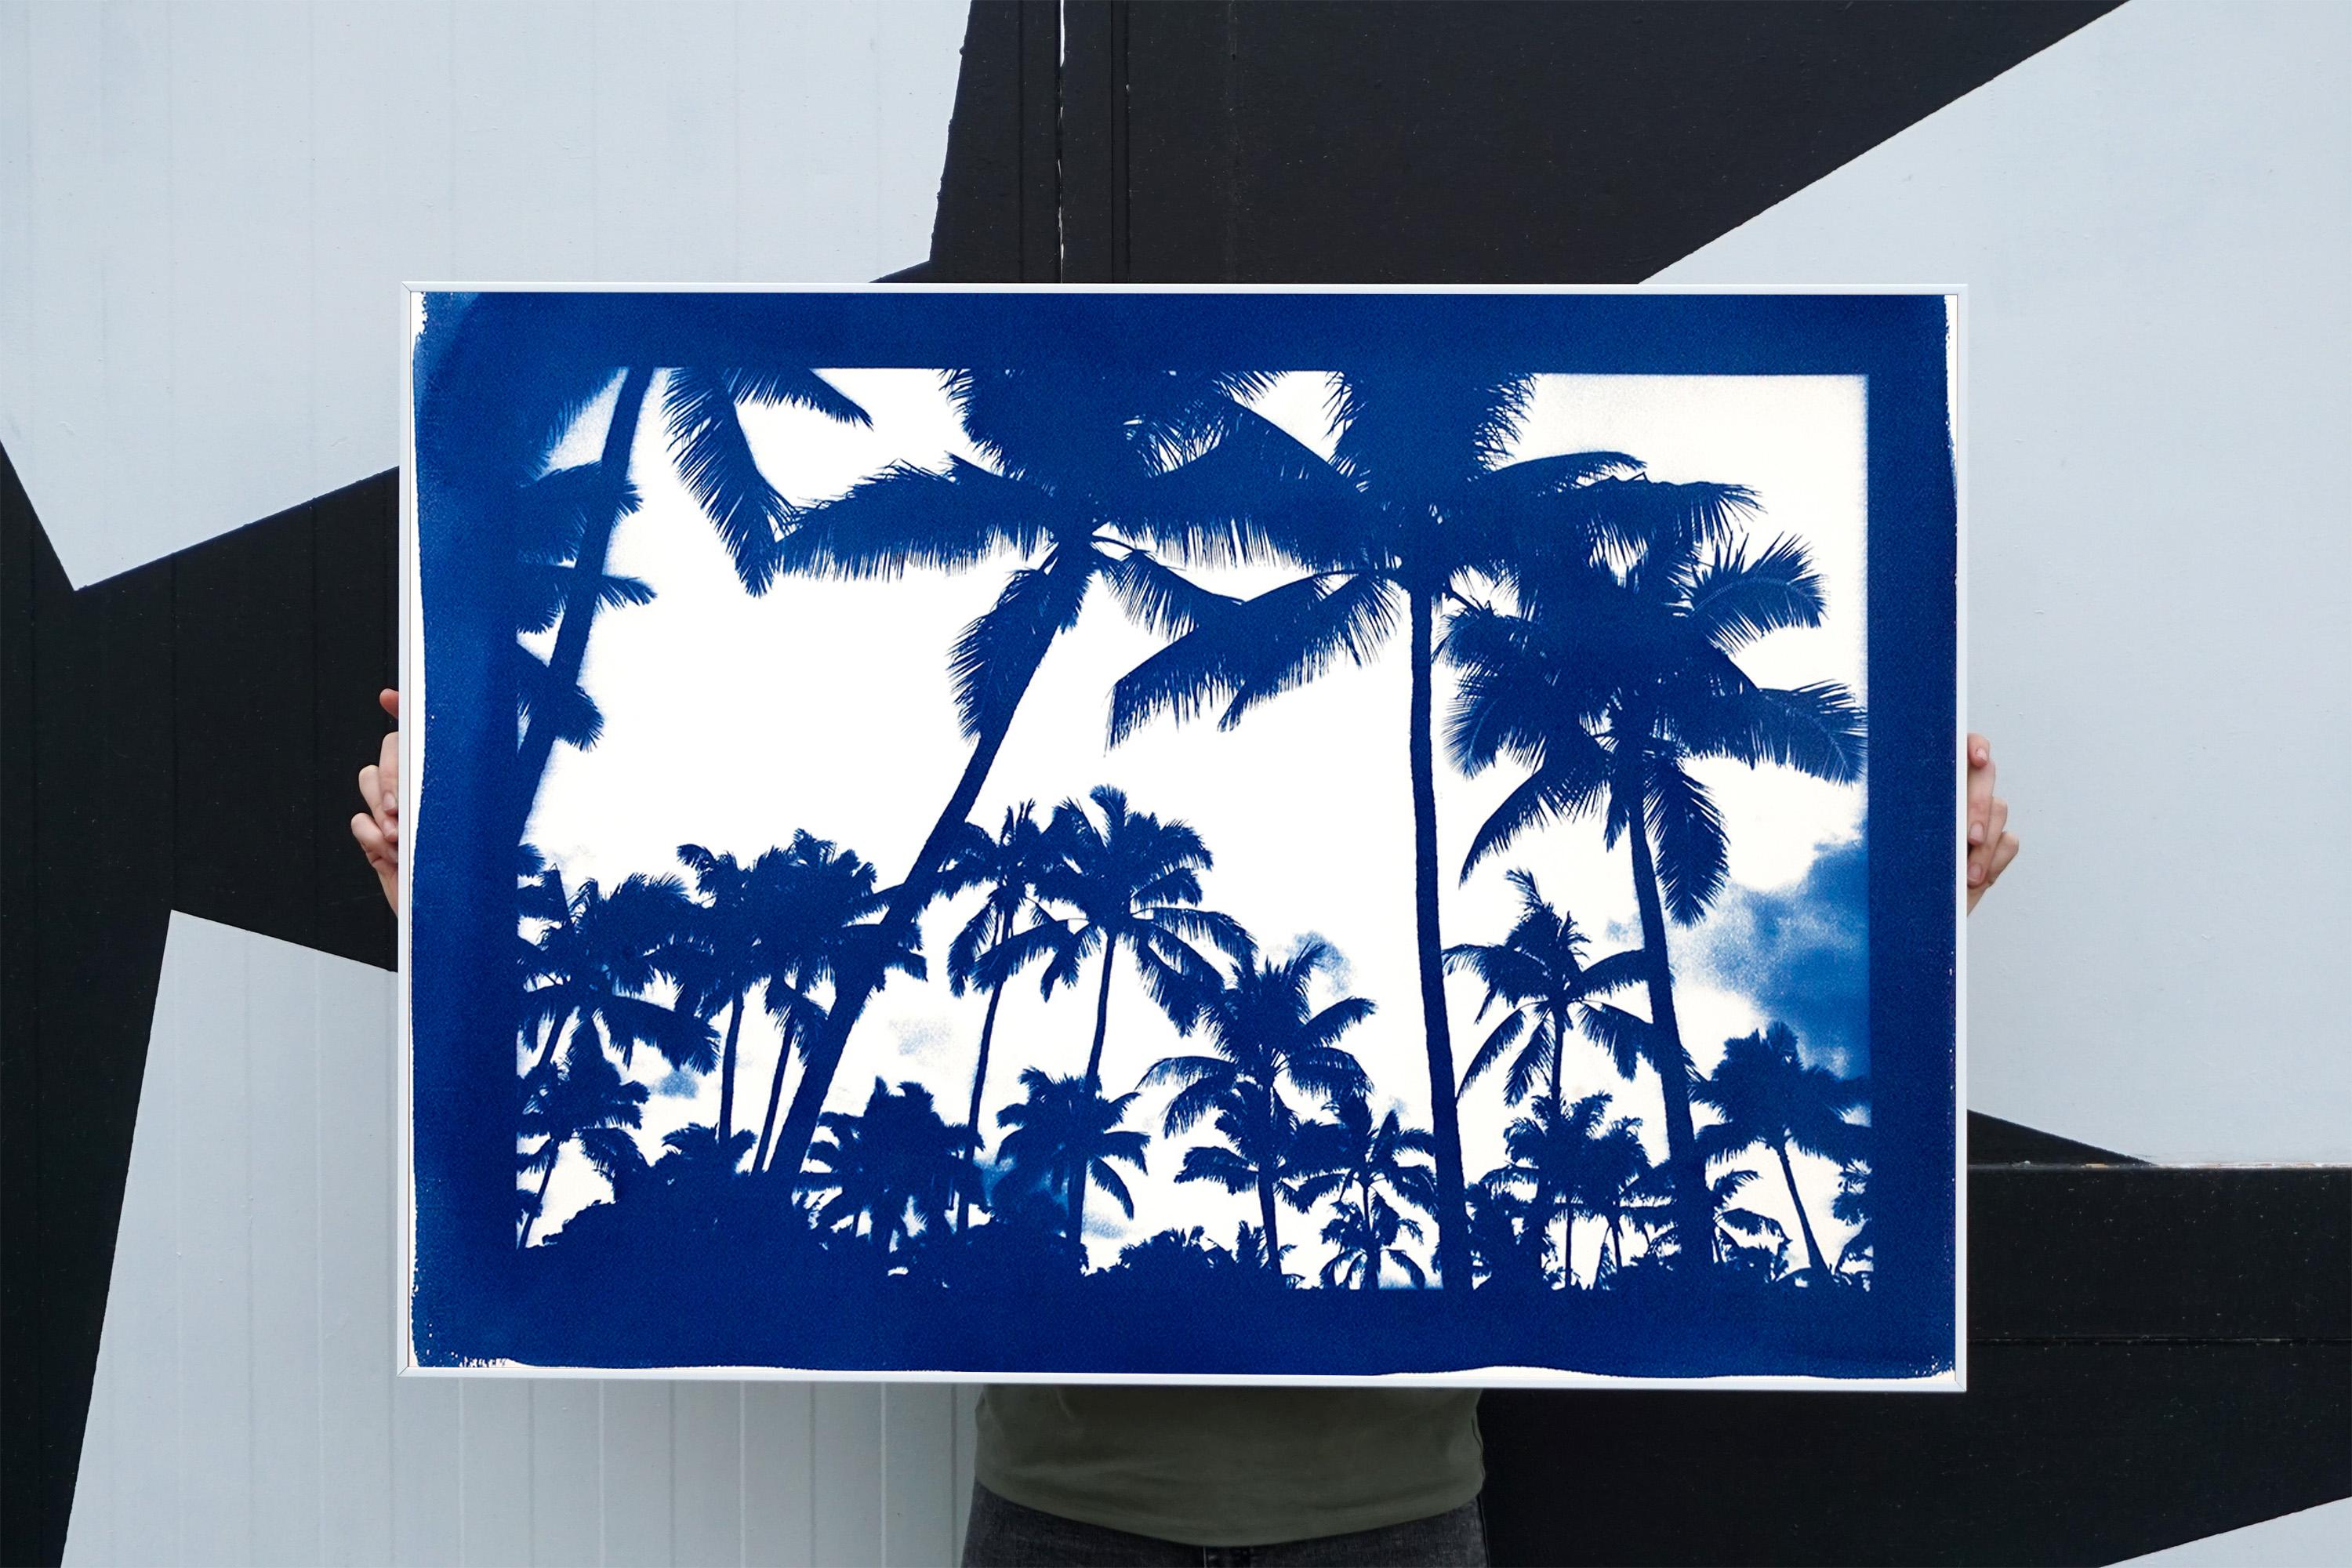 This is an exclusive handprinted limited edition cyanotype.
This image is of a coastal landscape showing the silhouettes of palm trees on an Acapulco beach.

Details:
+ Title: Acapulco Palm Sunset (Blue Border)
+ Year: 2019
+ Edition Size: 50
+